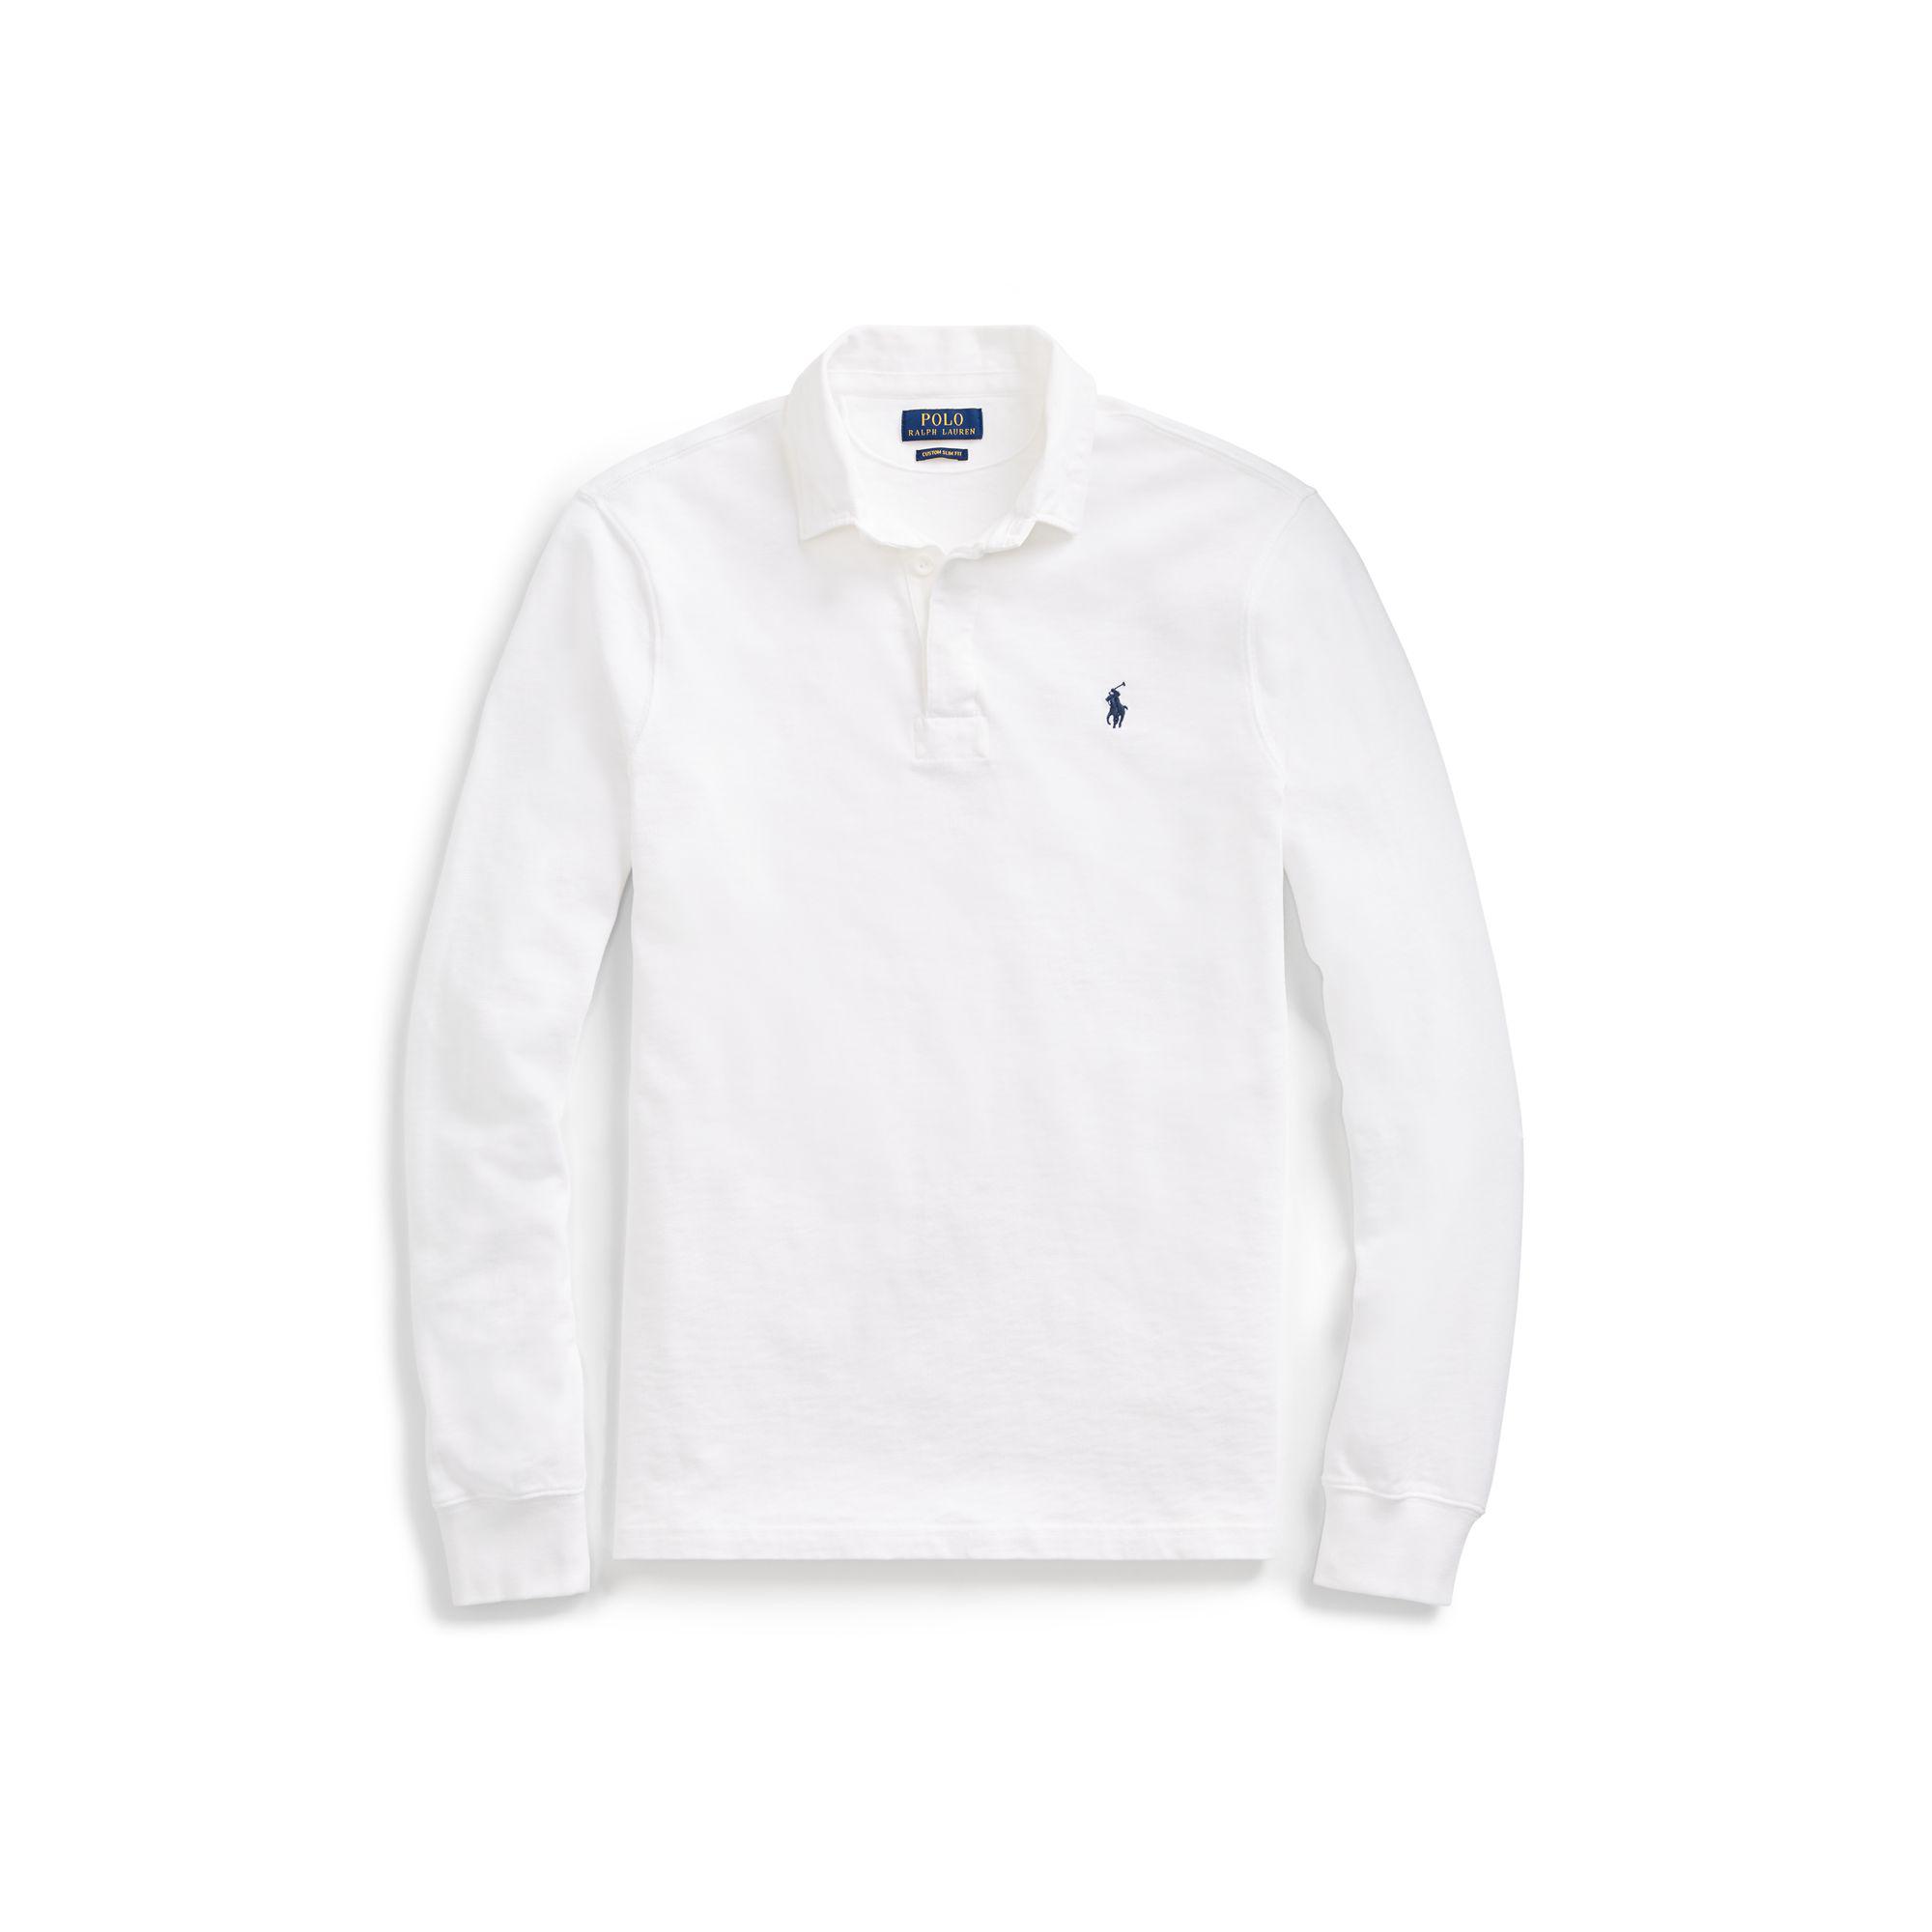 Polo Ralph Lauren Rubber The Iconic Rugby Shirt in White for Men - Lyst